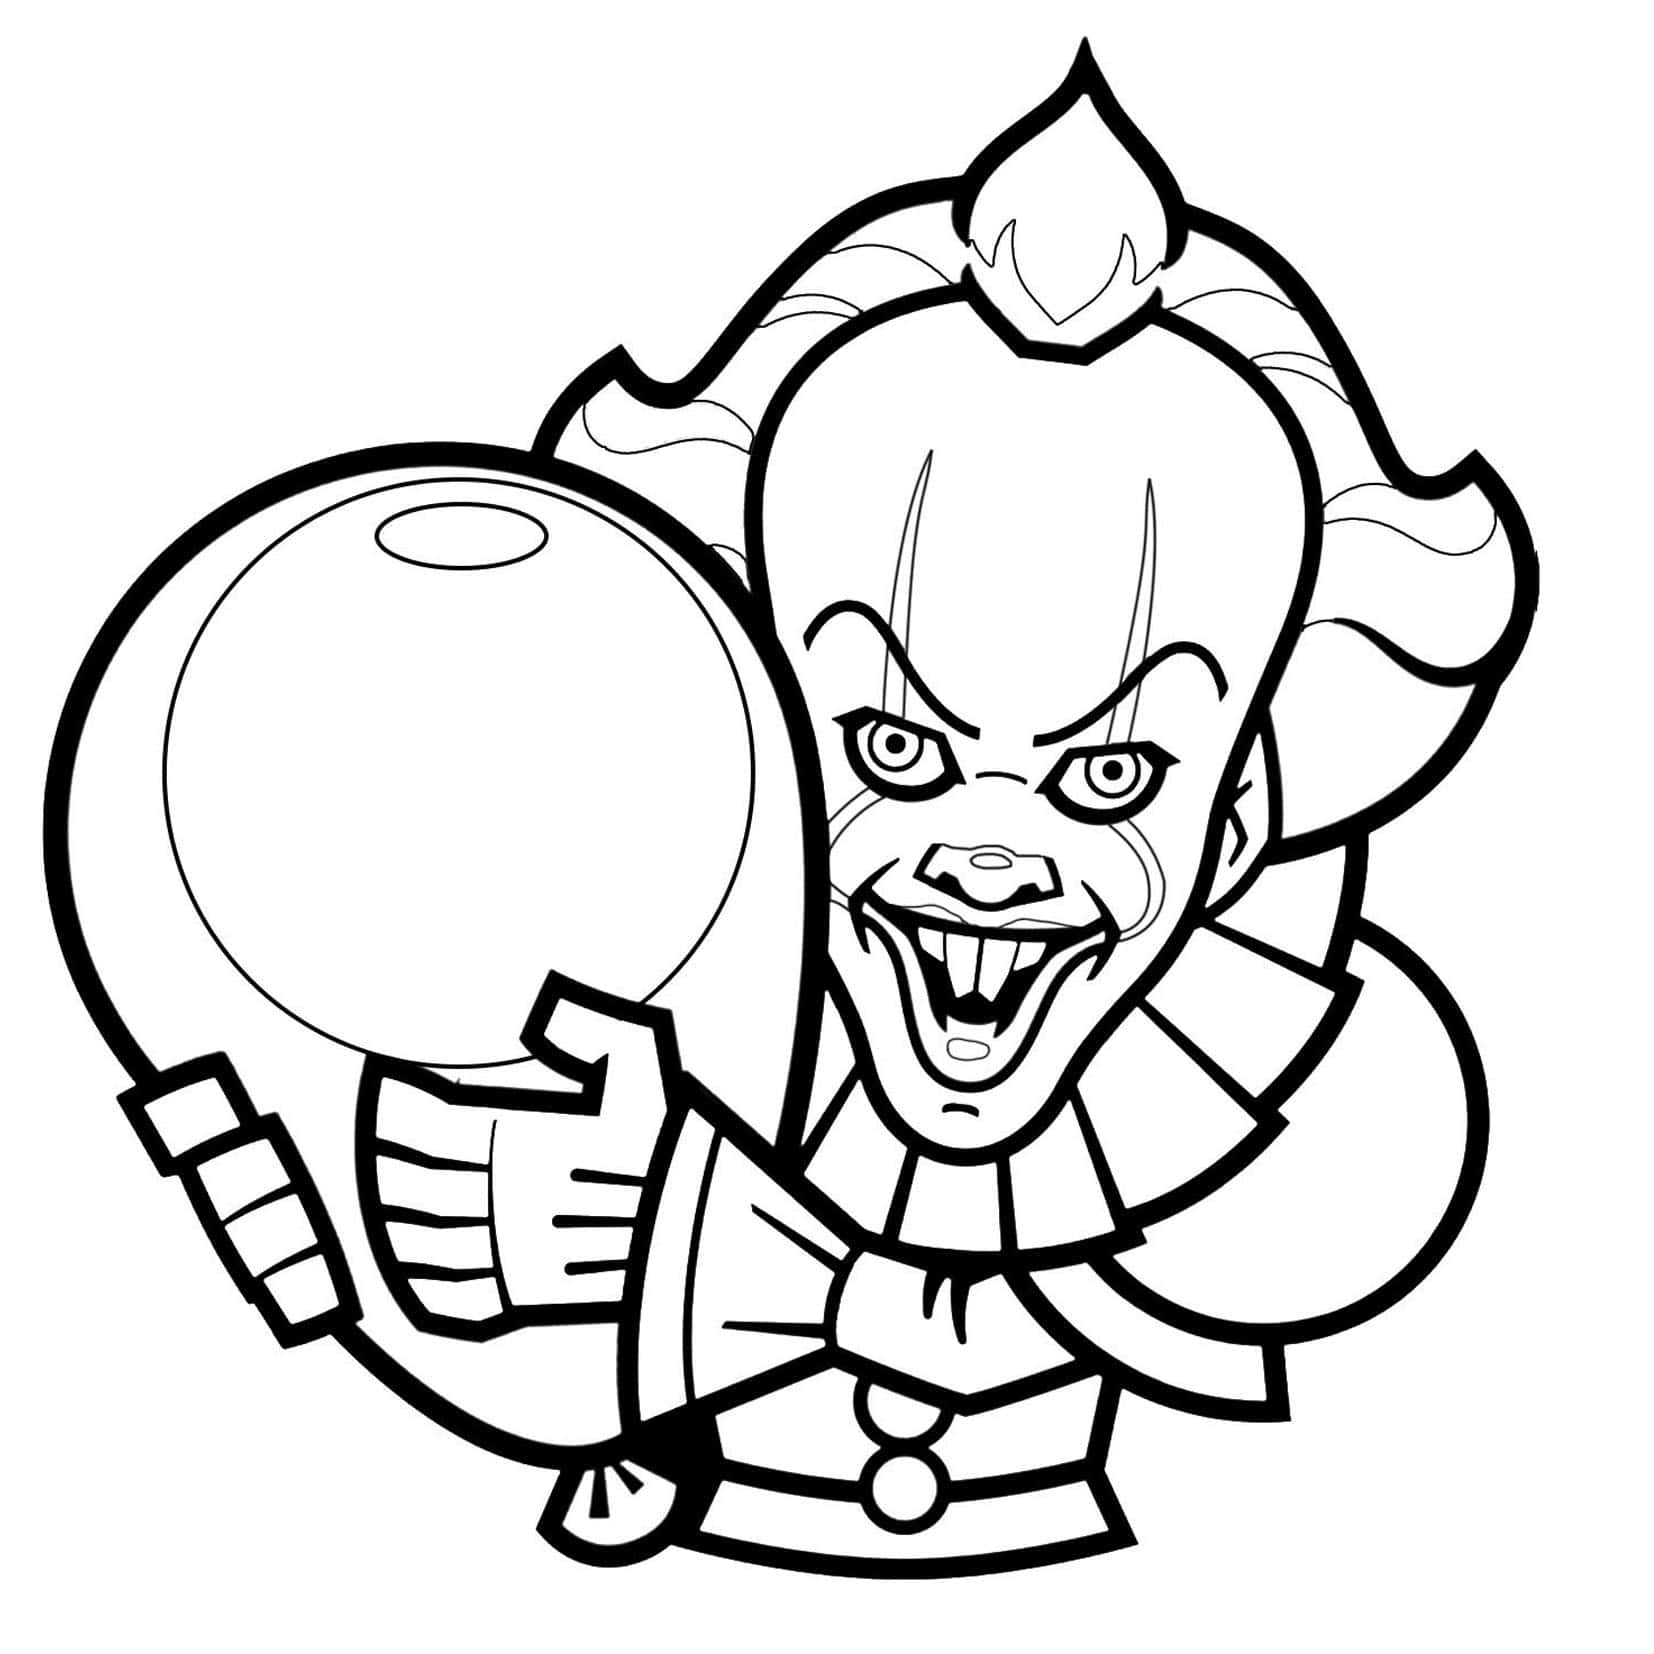 Creepy Clown | scary coloring pages for adults | horror coloring pages